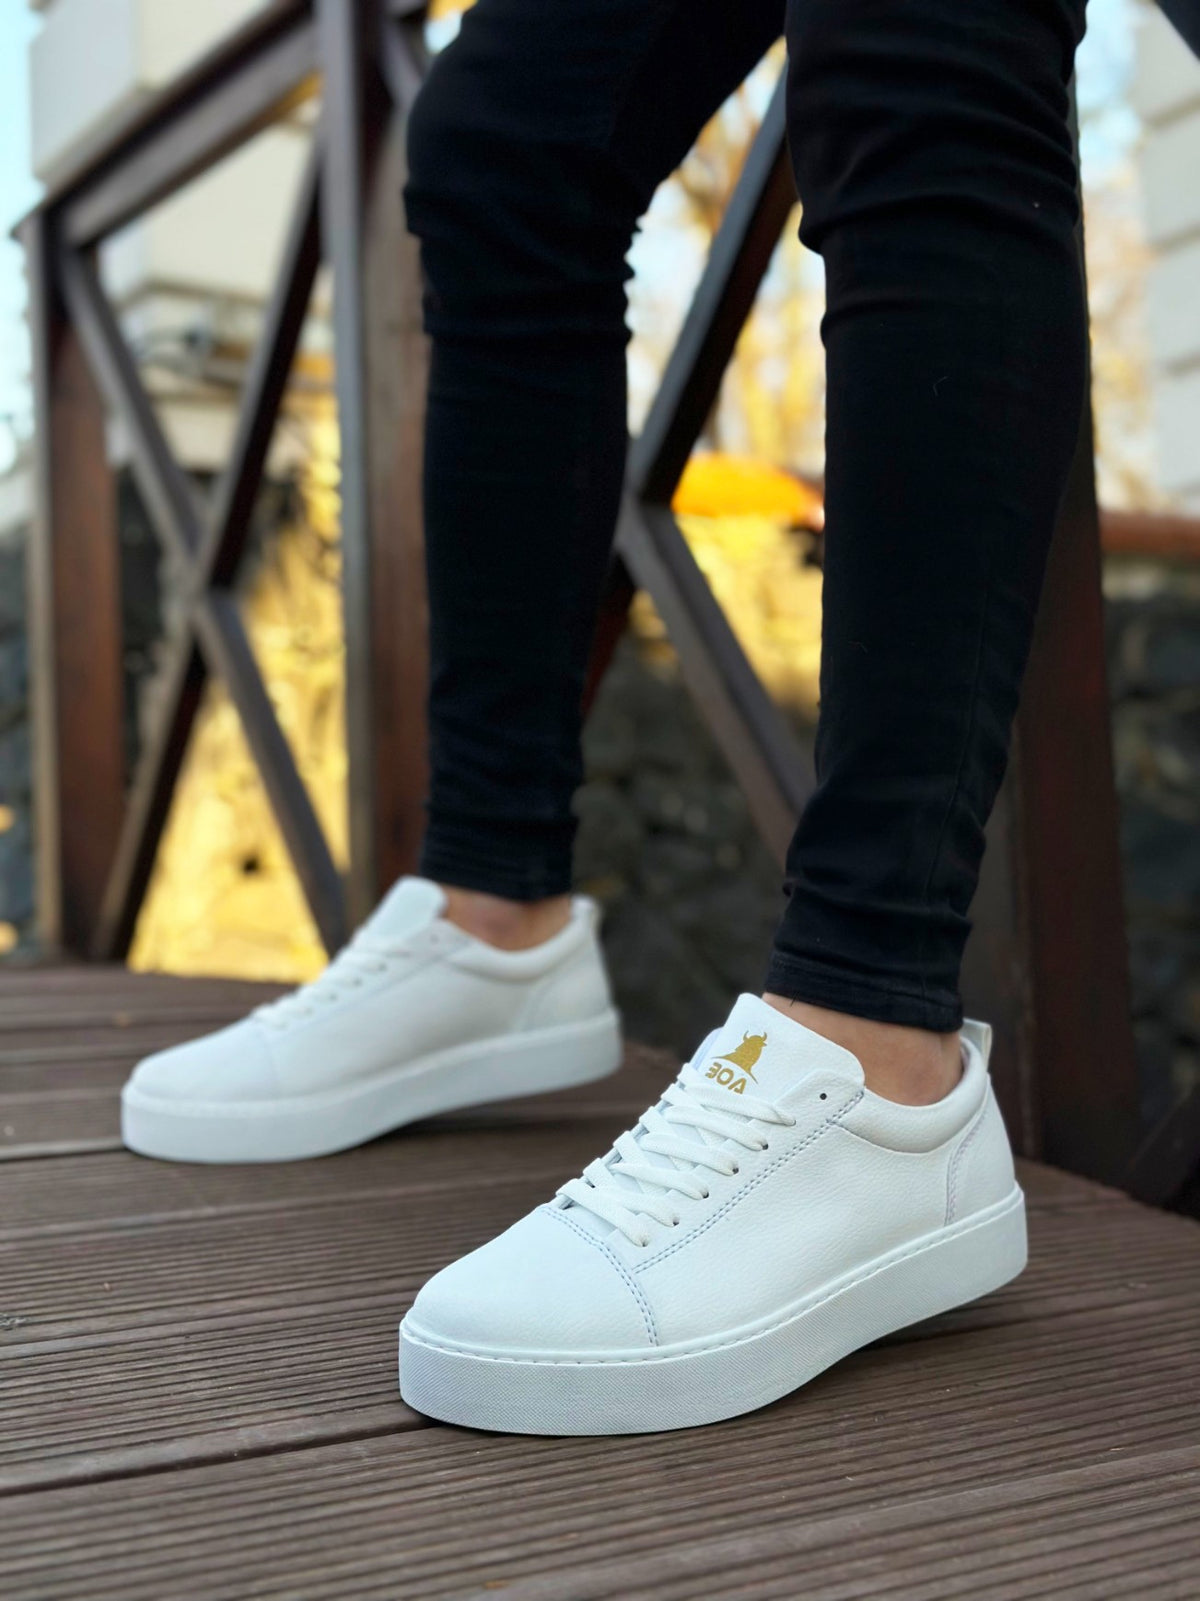 BA0104 Lace-Up White Skin Sport Classic Men's Sneakers Shoes - STREETMODE ™